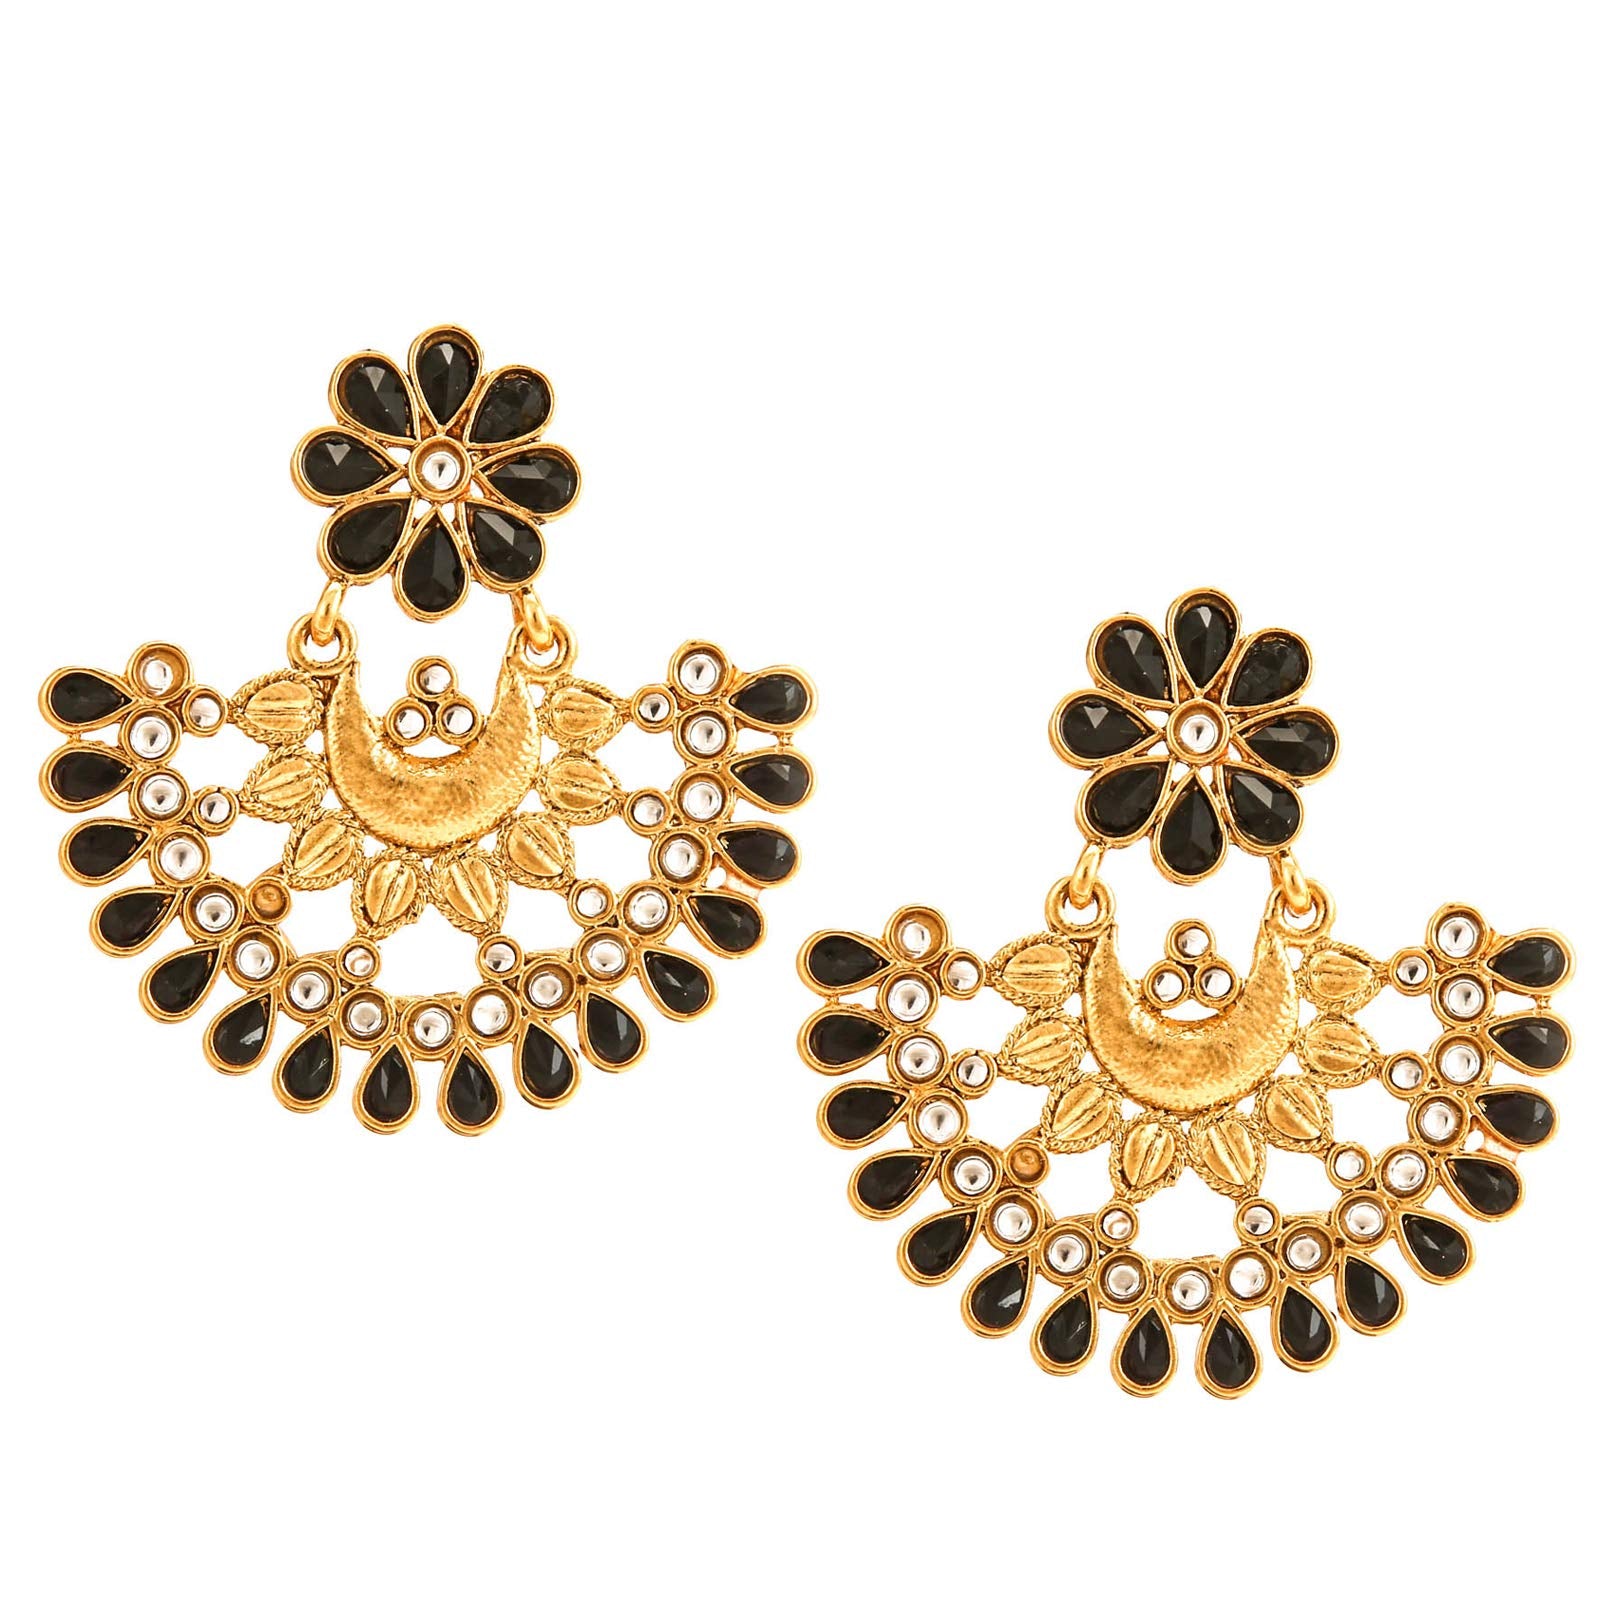 Yellow Chimes Ethnic Black Kundan Studded Traditional Gold Plated Chand Bali Earrings for Women and Girls